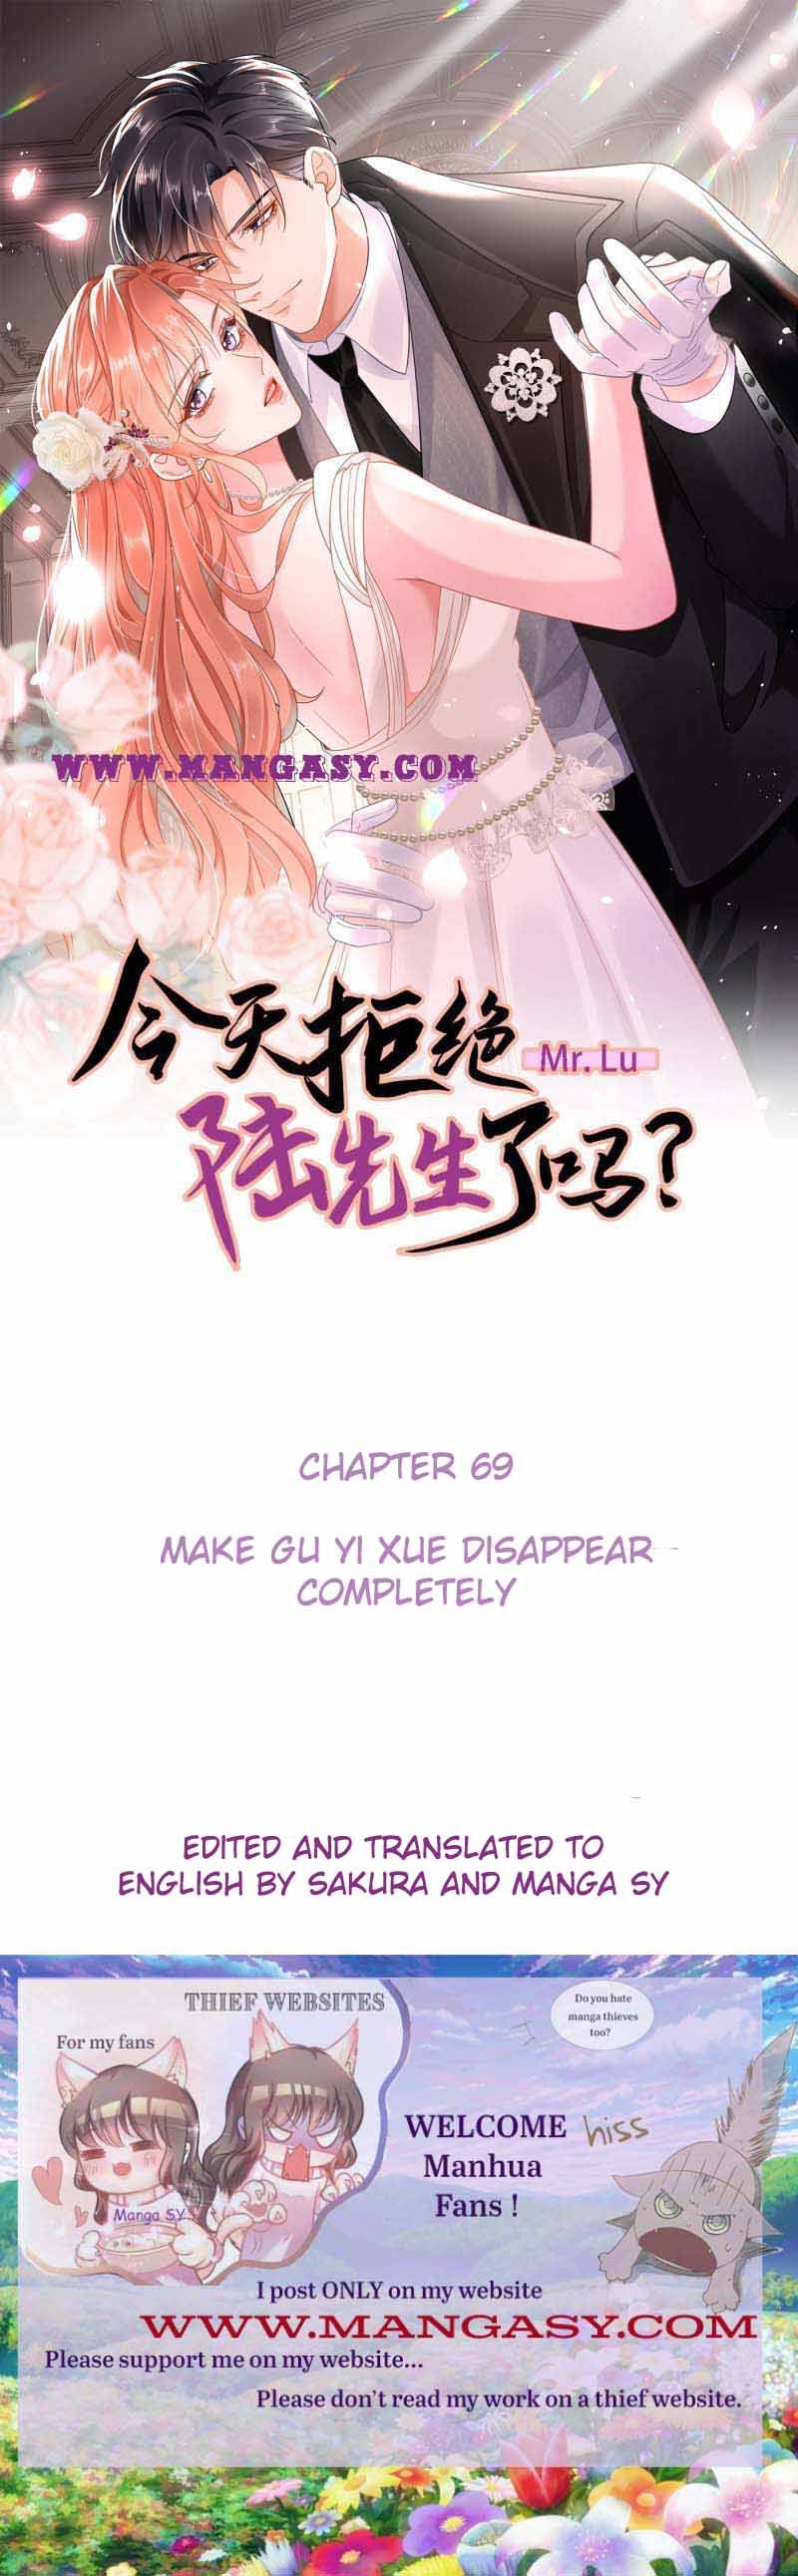 Did You Reject Mr.Lu Today? Chapter 69